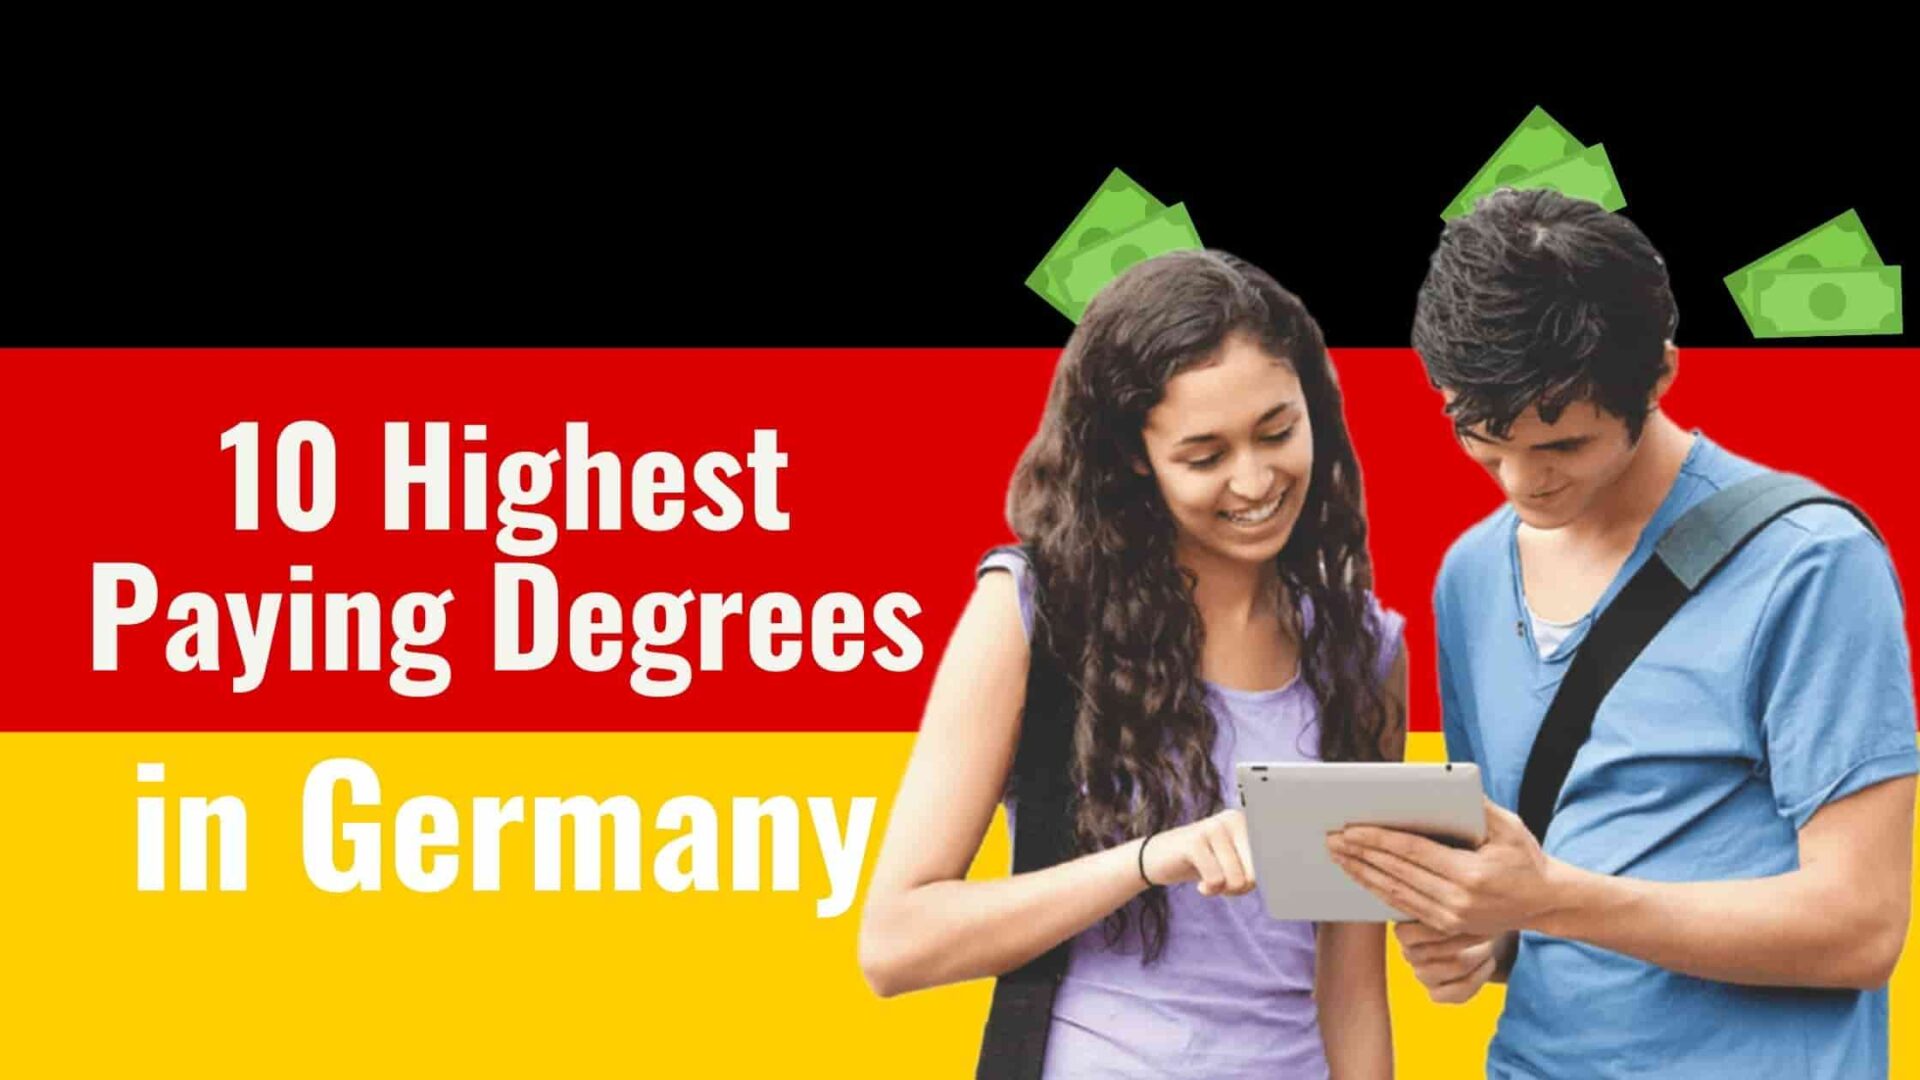 Highest Paying Degrees in Germany